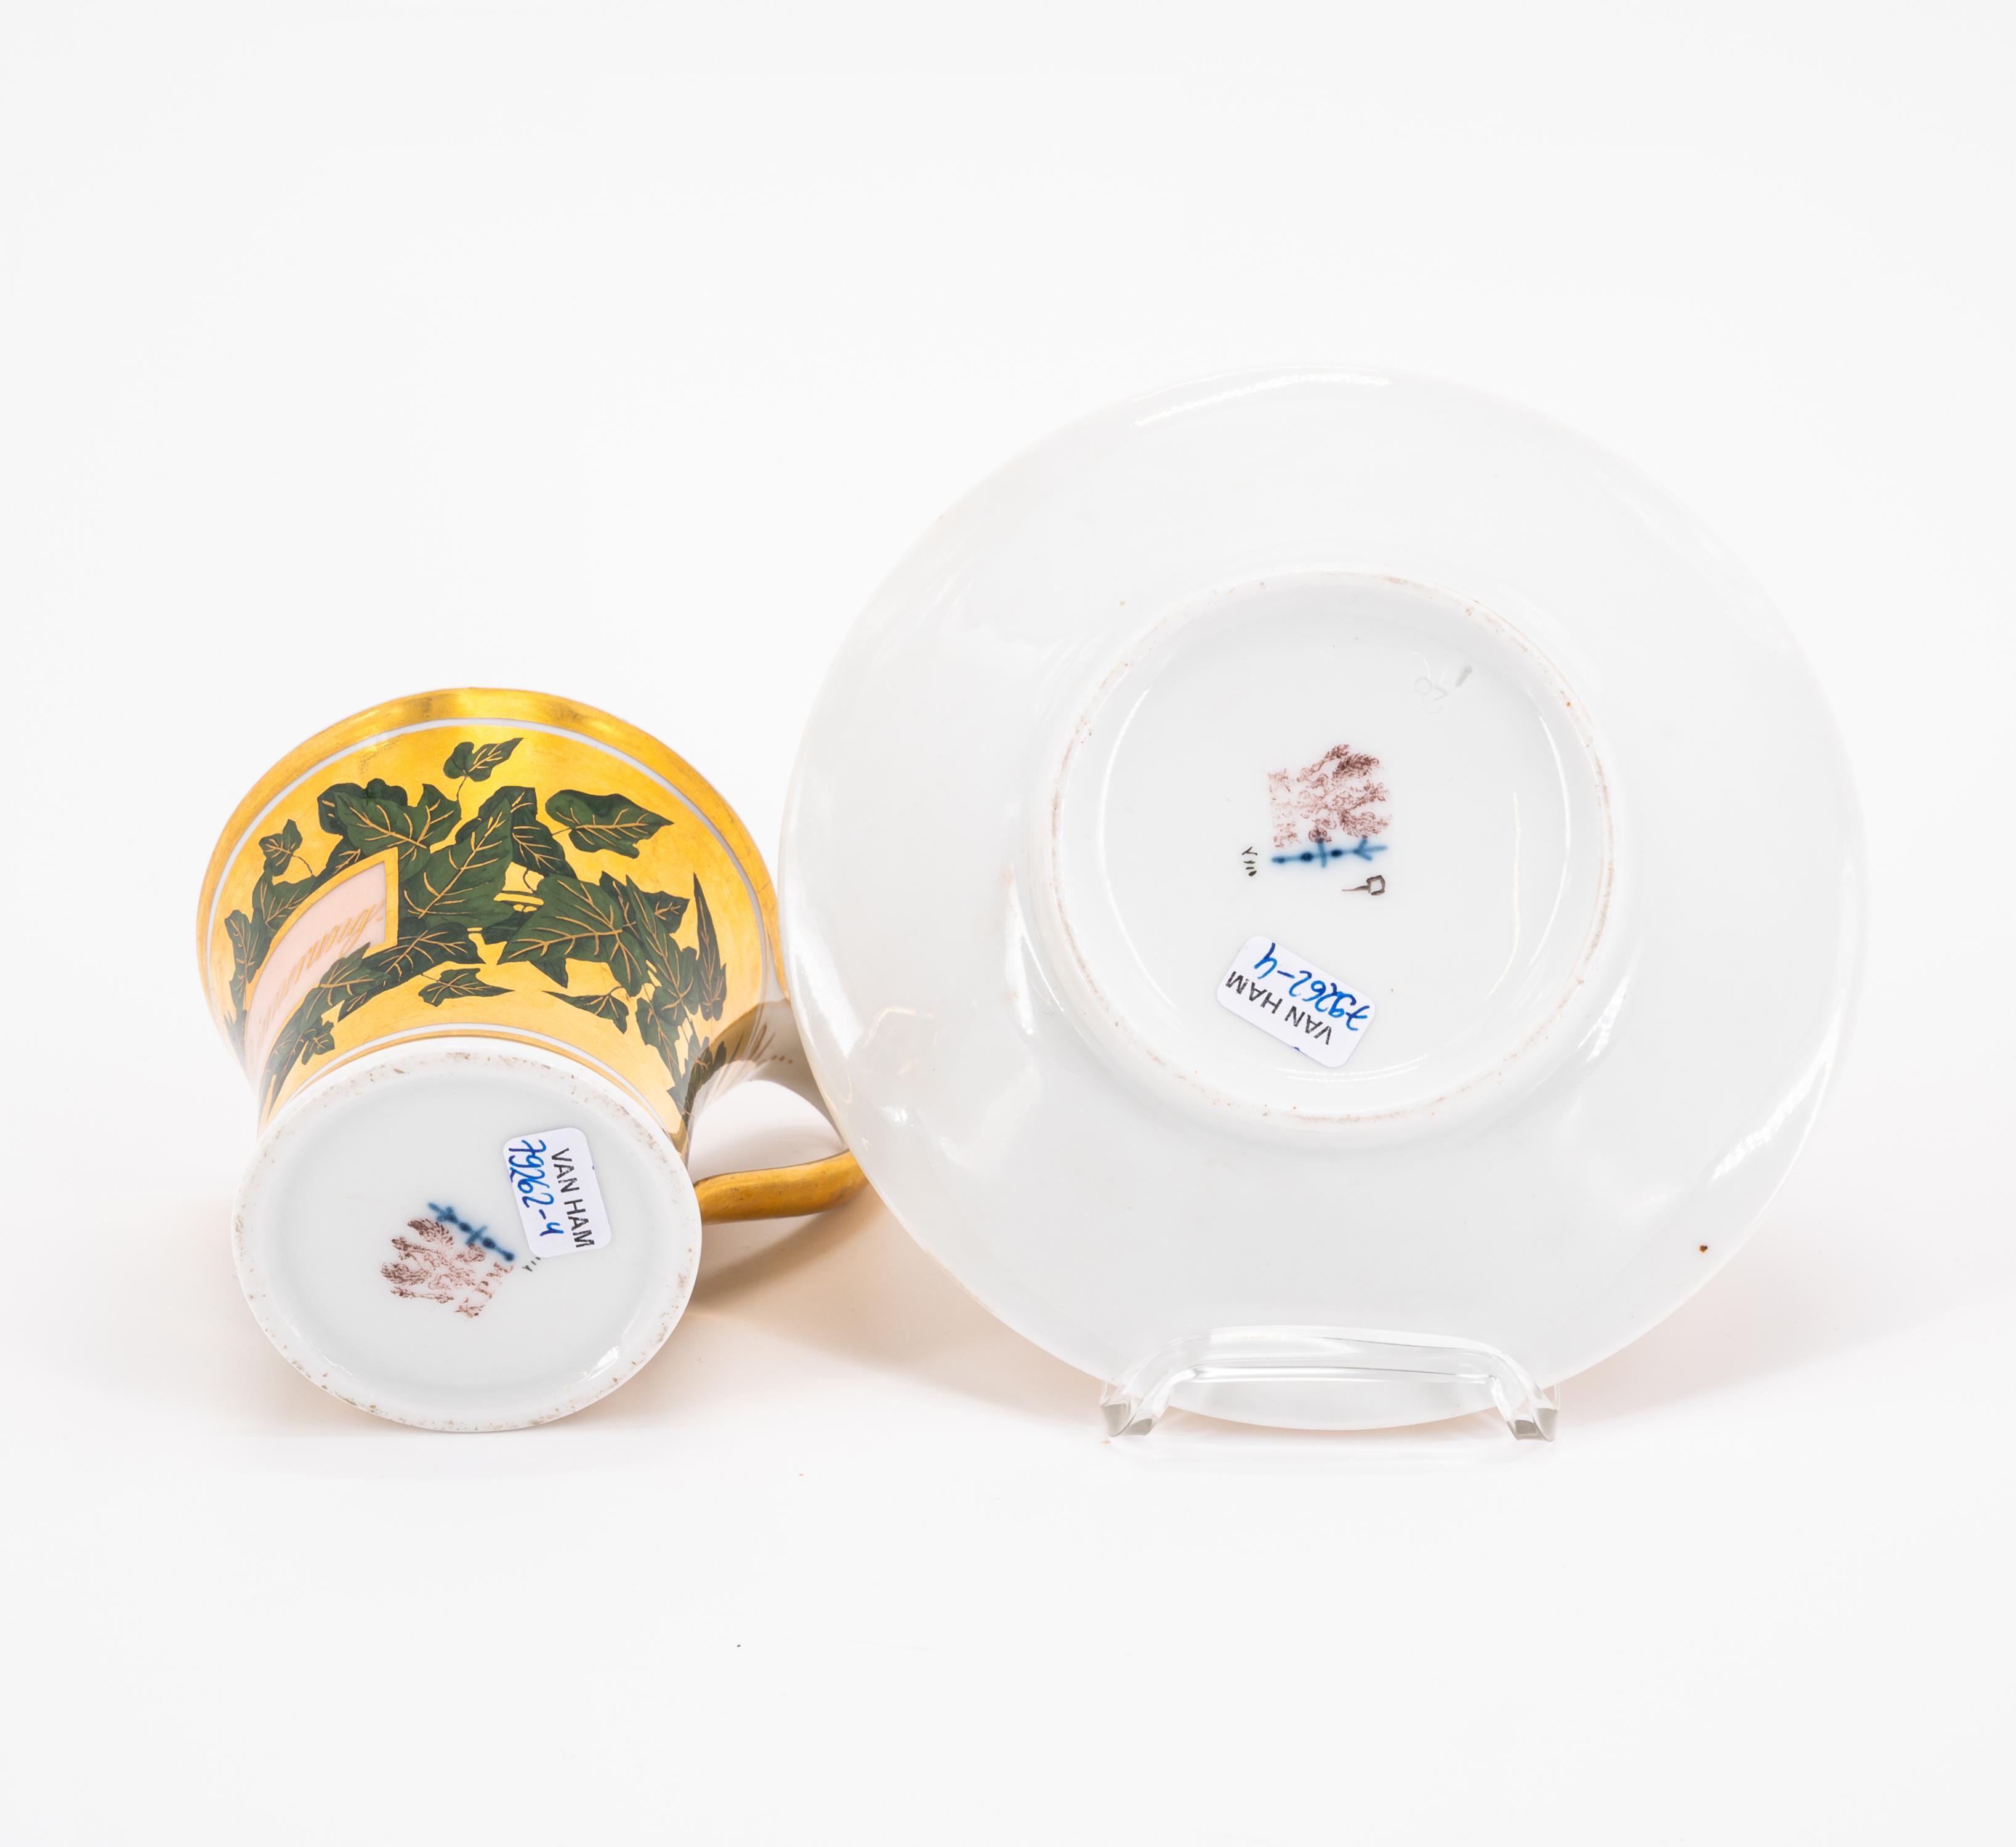 PORCELAIN CUP AND SAUCER WITH IVY AND INSCRIPTION "ERINNERUNG" - Image 6 of 6